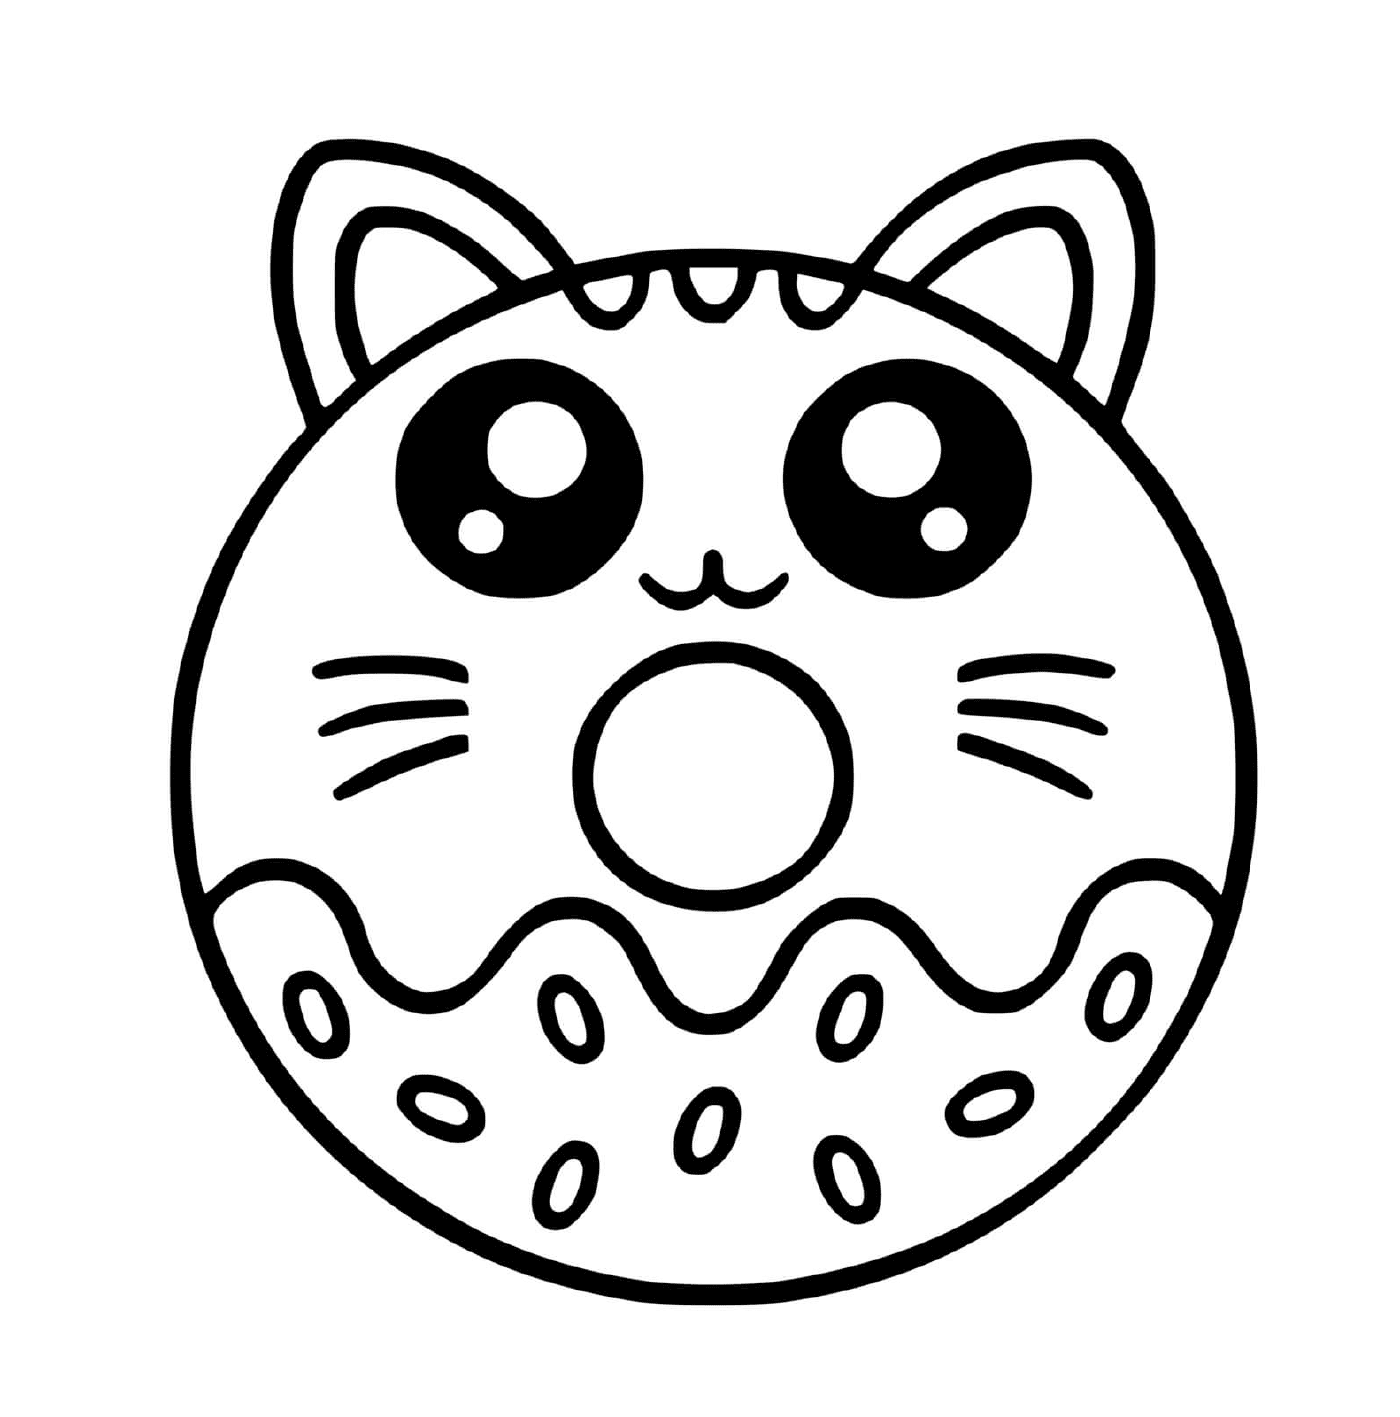 coloriage donut beigne chat kawaii